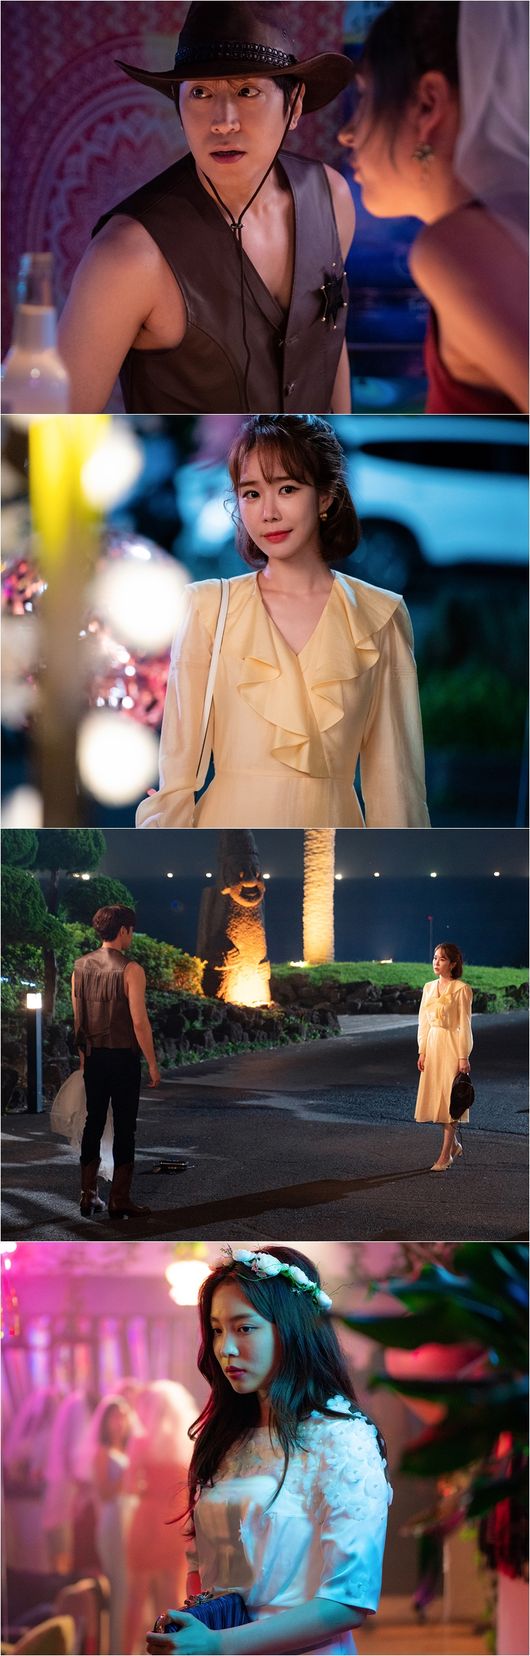 Spy who loved me kicks off the thrilling Romantic spyMBCs new tree drama Spy who Loved Me (playplayed by This Min, directed by Lee Jai-jin) unveiled the scene of The Slap, such as today (21st), Jeon Ji-hoon (Moon Jung-hyuk) and Lovers Vanished by Yoo In-na.Here, he captures the image of the bride An Sofi (Yoon So-hee), who has a strong sense of anxiety, and heralds an unusual event that will be stirred from the first broadcast.Spy who loved me paints secretive two husbands and a woman caught up in spy warfares Sreekha Mitramantic comedyThe wonderful intelligence of three men and women who can never be together gives a pleasant smile and a thrilling excitement.Director Lee Jai-jin, who directed The Banker and My Daughters Golden Month, will take megaphone and the script will be written by This Min.It is more focused on the fact that it is the first drama of This Min, who has produced big hits such as Namsans Directors, Astronomy: Asking in the Sky, and Minjung.The photo, which was released ahead of the first broadcast, shows the Slap Jeon Ji-hoon and Kang-hoon in a place that I did not think after divorce.In an earlier preview, Jeon received an invitation to the question, Im inviting you to a virgin party. Ill wait, Sheriff.Jeon Ji-hoon, who discovered Kang-eum while performing a camouflage mission to meet key sources, added curiosity to the embarrassment of his eyes.It is interesting to see Jeon Ji-hoon and Kang-eum facing each other for a long time. Jeon Ji-hoon and Kang-hoon, who met like fate in a strange destination and loved them hotly.But Jeon Ji-hoon, who was an Interpol secret police officer, could not reveal his identity to Kang-hoon, who could not be honest to protect his love and the Kang-hoon who did not know his secret in his dream.The two people who met again after the divorce are curious about what dynamic spying will be.The dangerous appearance of Ansofi, the best friend of Kang, who is the main character of the Bridal shower in the ensuing photo, attracts attention. The face of the bride who should be filled with happiness is filled with anxiety.Who sent the invitation to the secret police officer Jeon Ji-hoon, and the tension of Lovers Vanished makes the beginning of the romantic spy war of Sreelekha Mitra Manga more anticipated.In the first broadcast of Spy who loved me, Jeon Ji-hoon and Kang-hoons fateful first meeting, divorce, and the wonderful The Slap are drawn.Jeon Ji-hoon, who loved hotly but divorced at the end of twists and turns, and the process of becoming Mali before the intelligence will be unfolded.The production team of Spy who loved me said, Please expect romantic intelligence completed by Moon Jung Hyuk, Yoo In-na and Lim Joo-hwan with a thorough synergy.From the first broadcast to the sweet romance and the thrilling spy show, you will be able to feel the true value of the secret and deep adult melodrama in a pleasant comedy.I would like to ask for a lot of expectations. The first broadcast tonight at 9:20 pm.Written and painted.